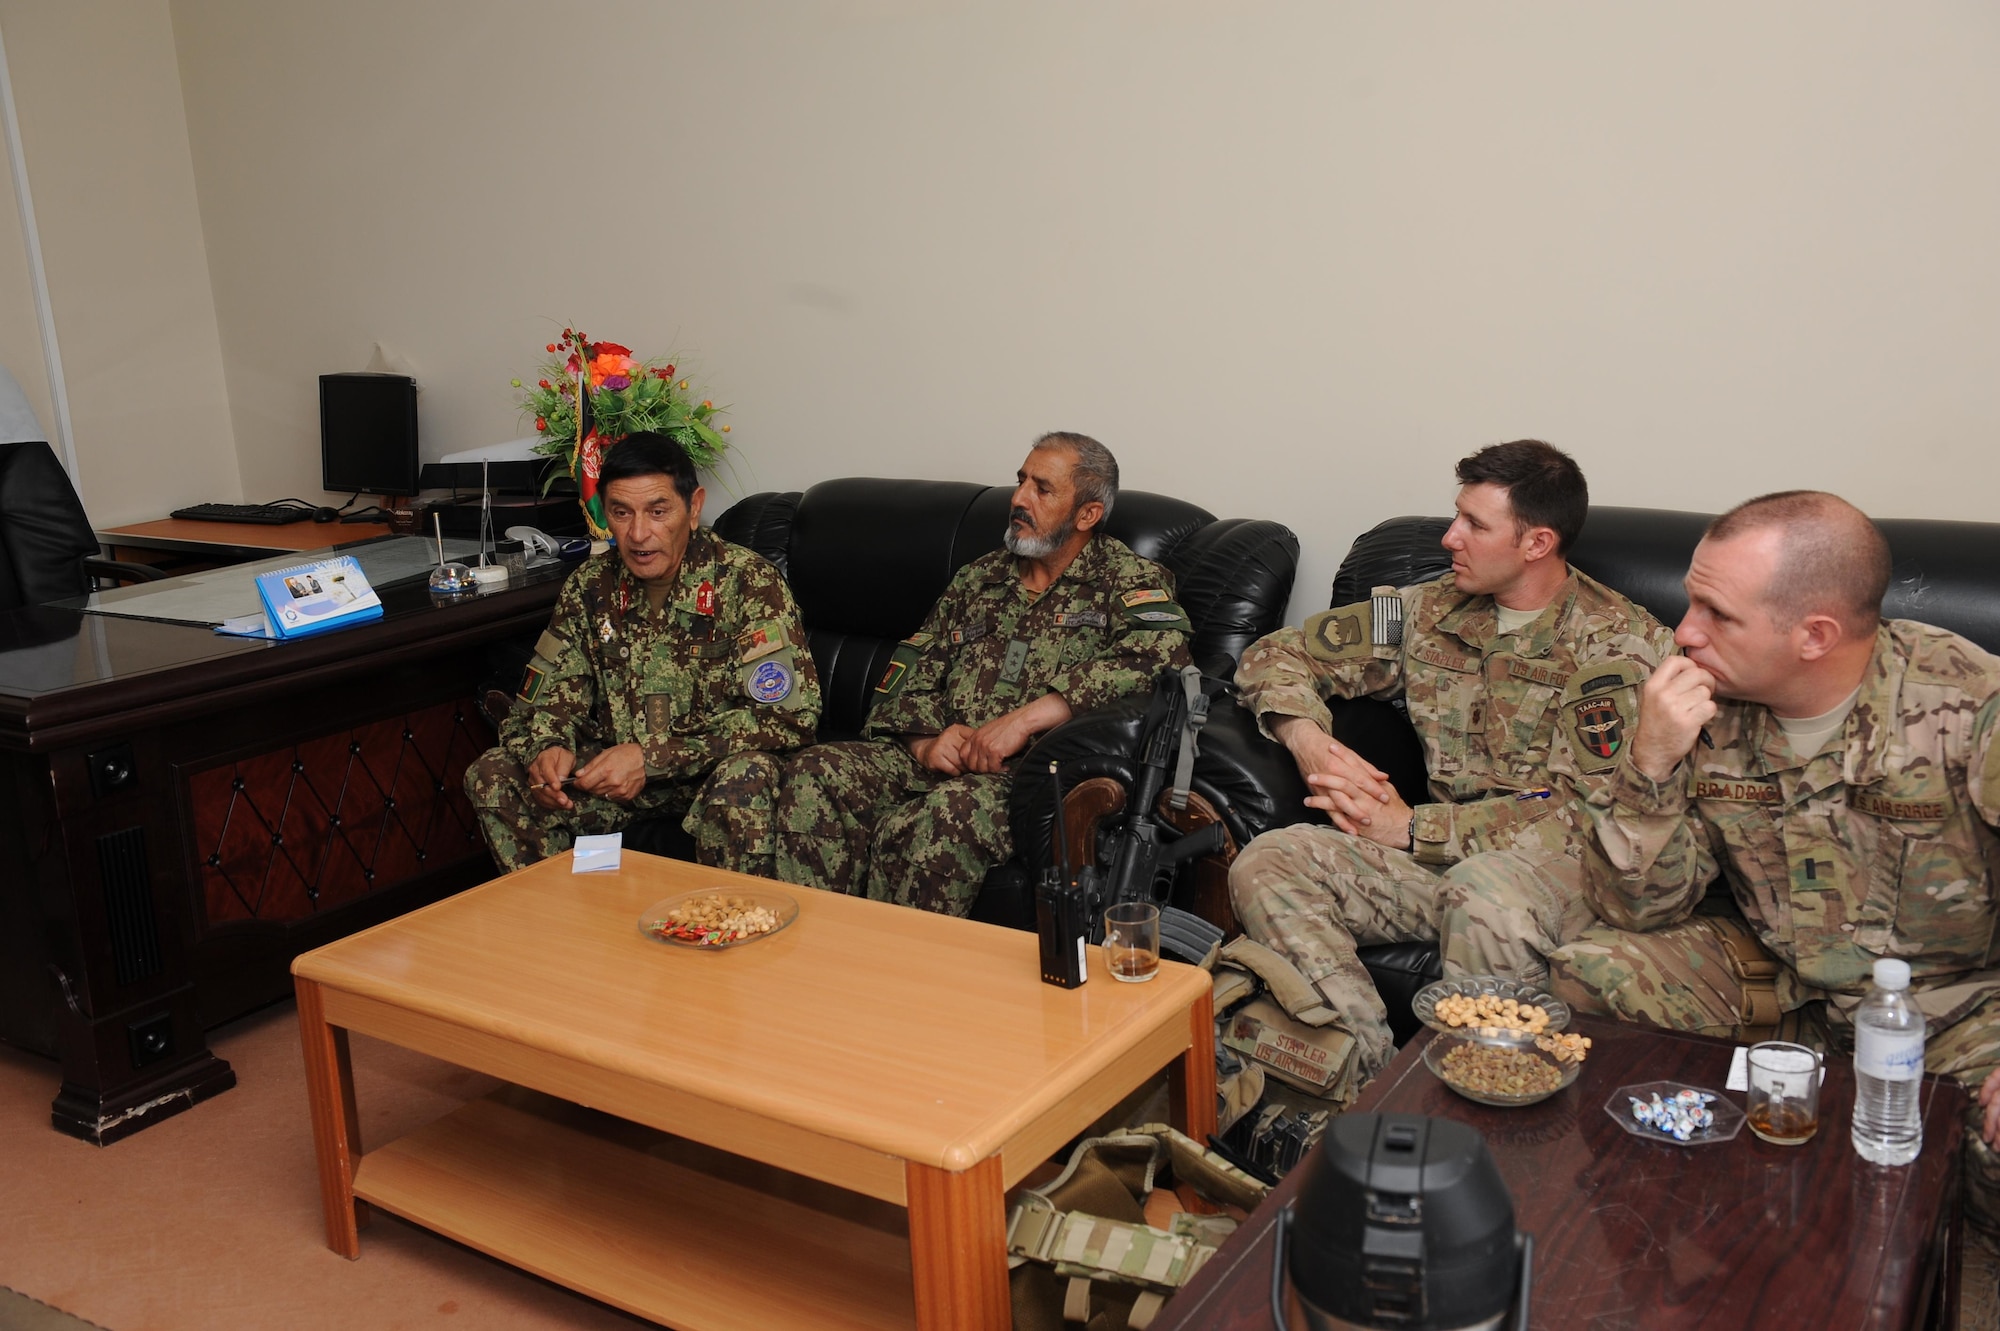 Maj. Sean Stapler and 1st Lt. Steven Braddick, Train, Advise, Assist Command – Air engineer advisers, speak with their Afghan counterparts during a meeting at Kandahar Air Wing, April 29, 2015. (U.S. Air Force photo/Capt. Jeff M. Nagan)